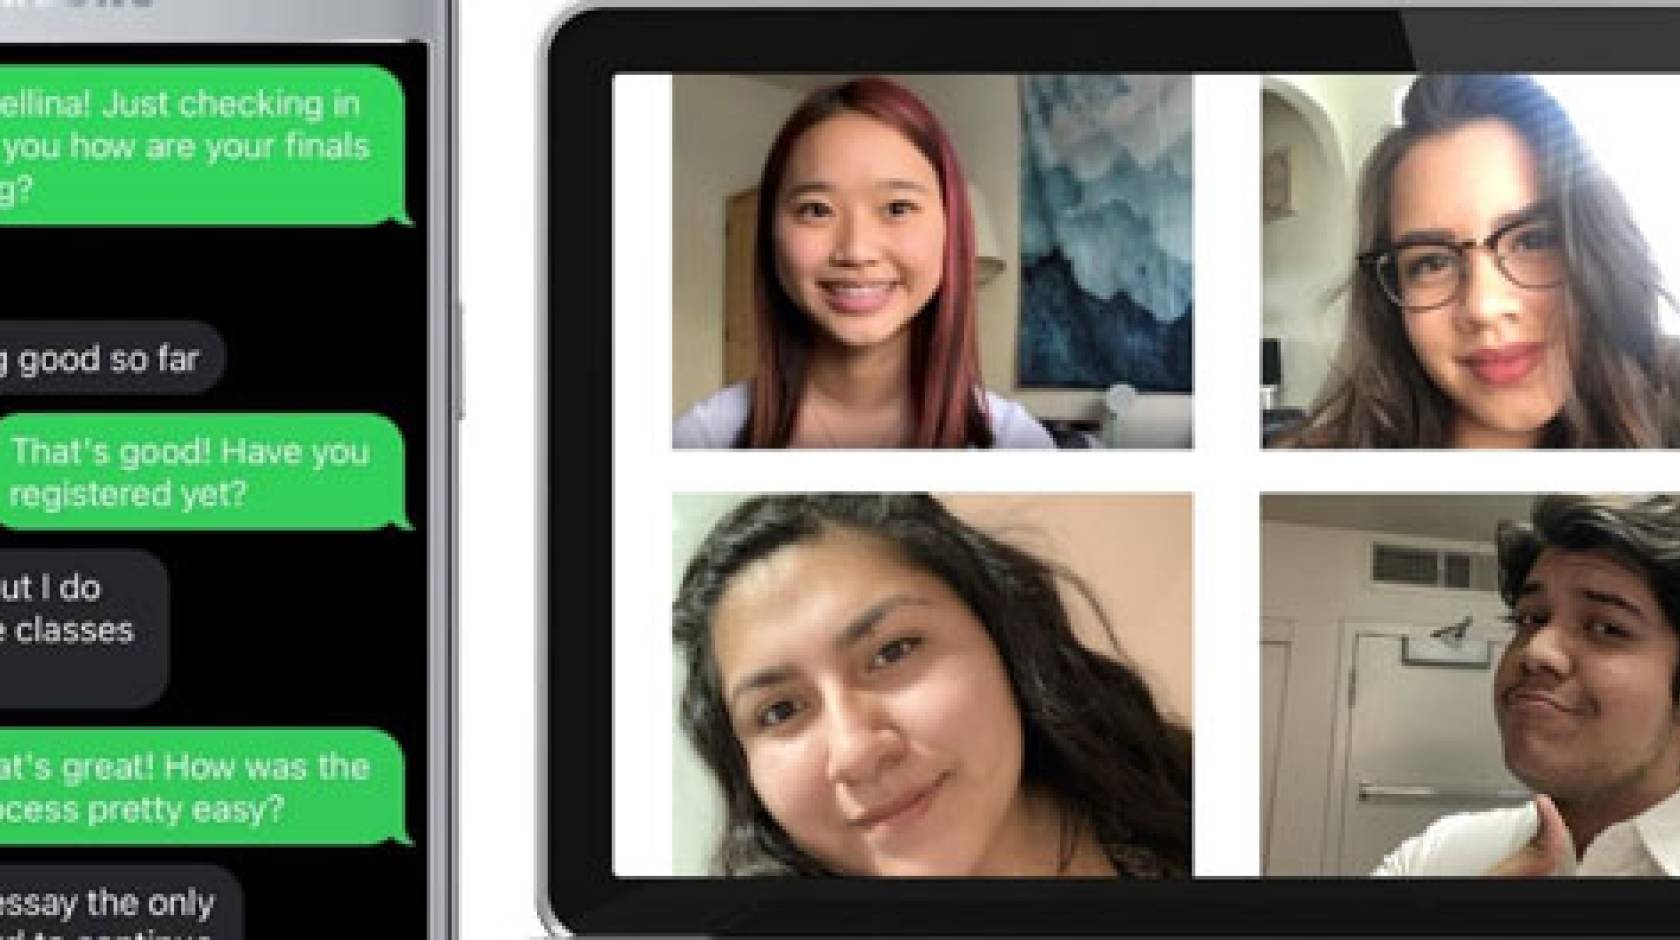 Texts from mentor-mentee and video chat squares side-by-side